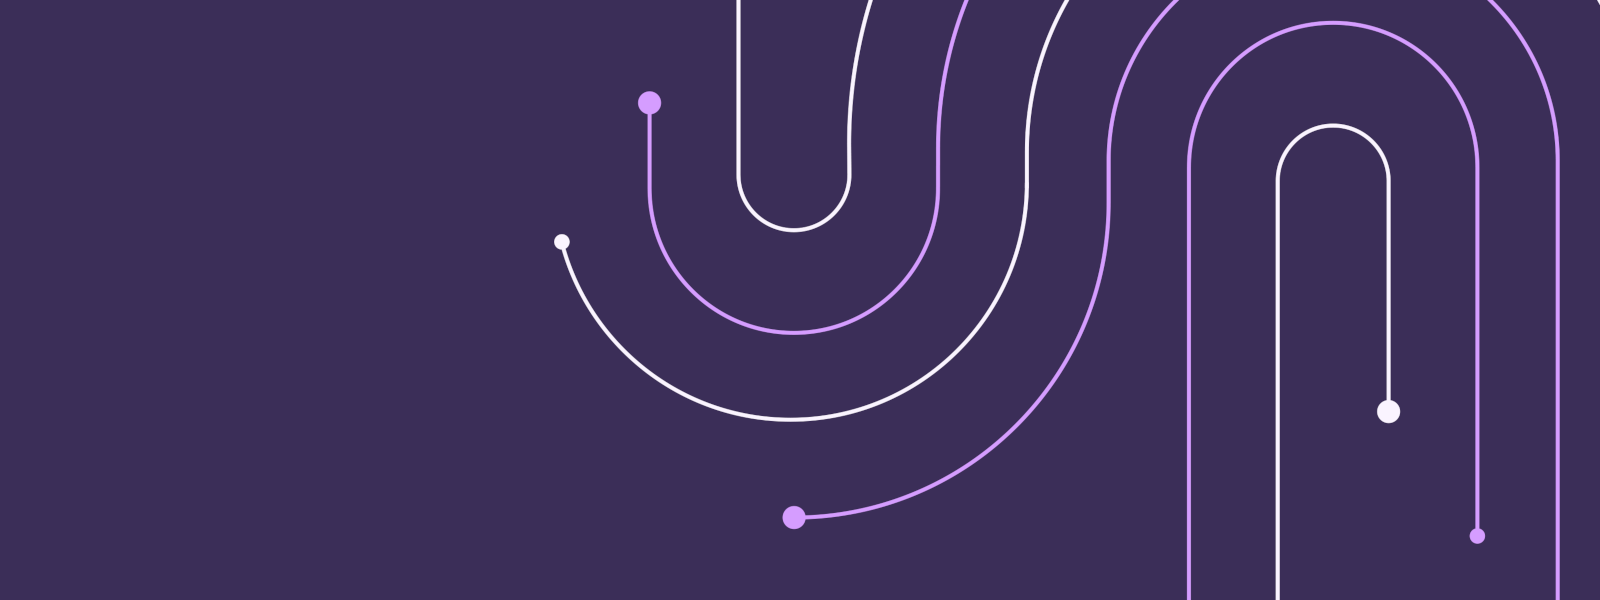 Illustration of solid lines forming shaped curves on a purple background